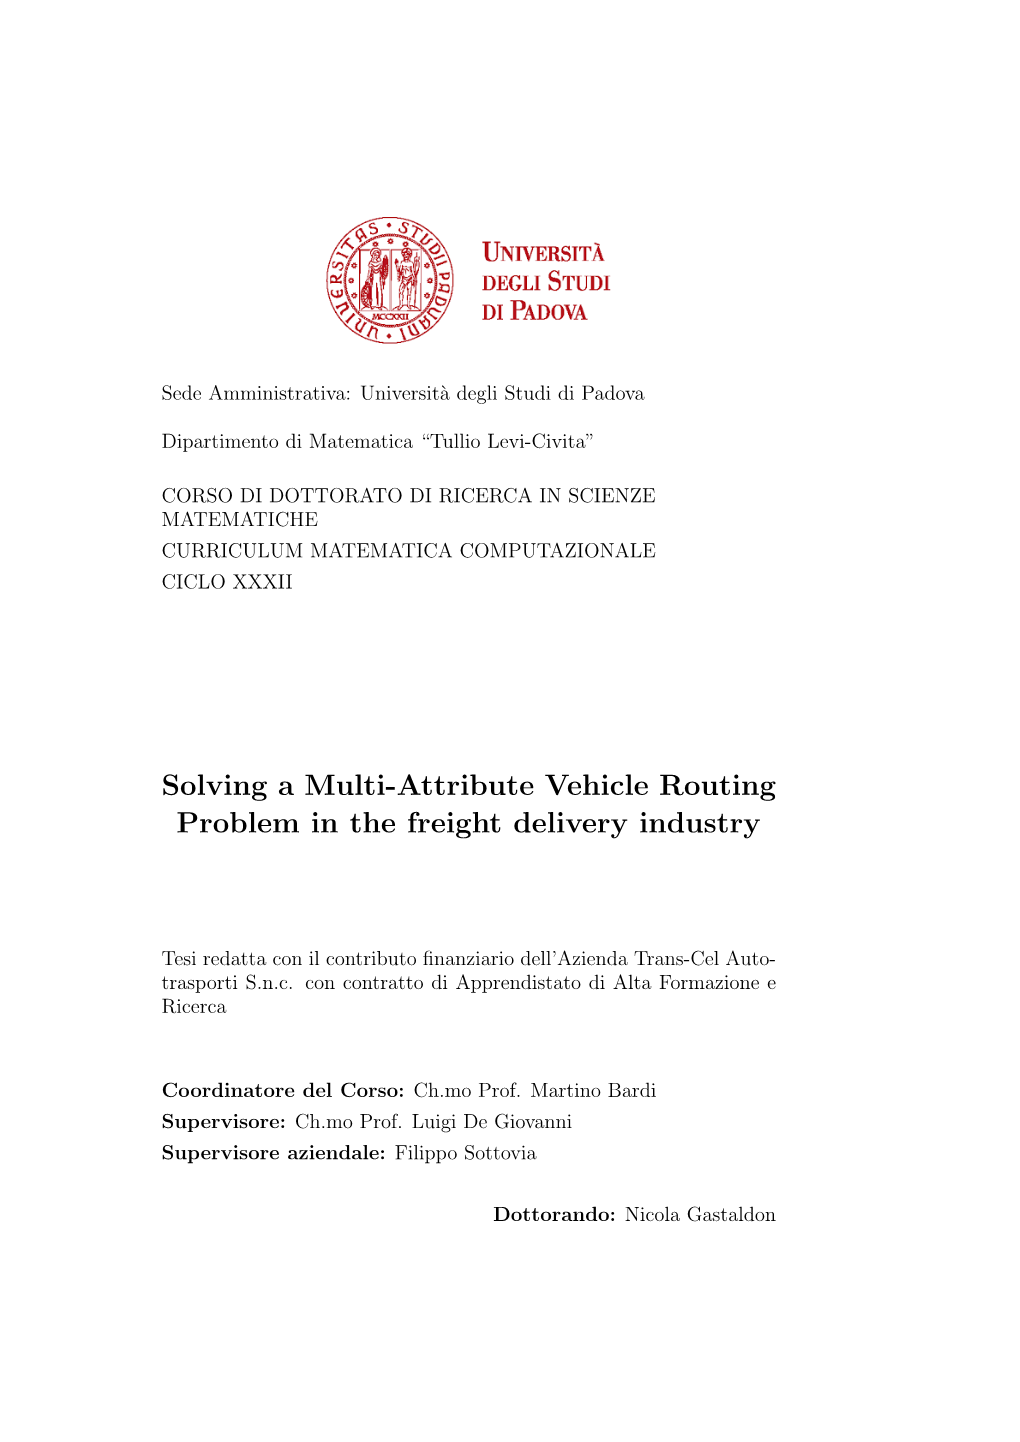 Solving a Multi-Attribute Vehicle Routing Problem in the Freight Delivery Industry